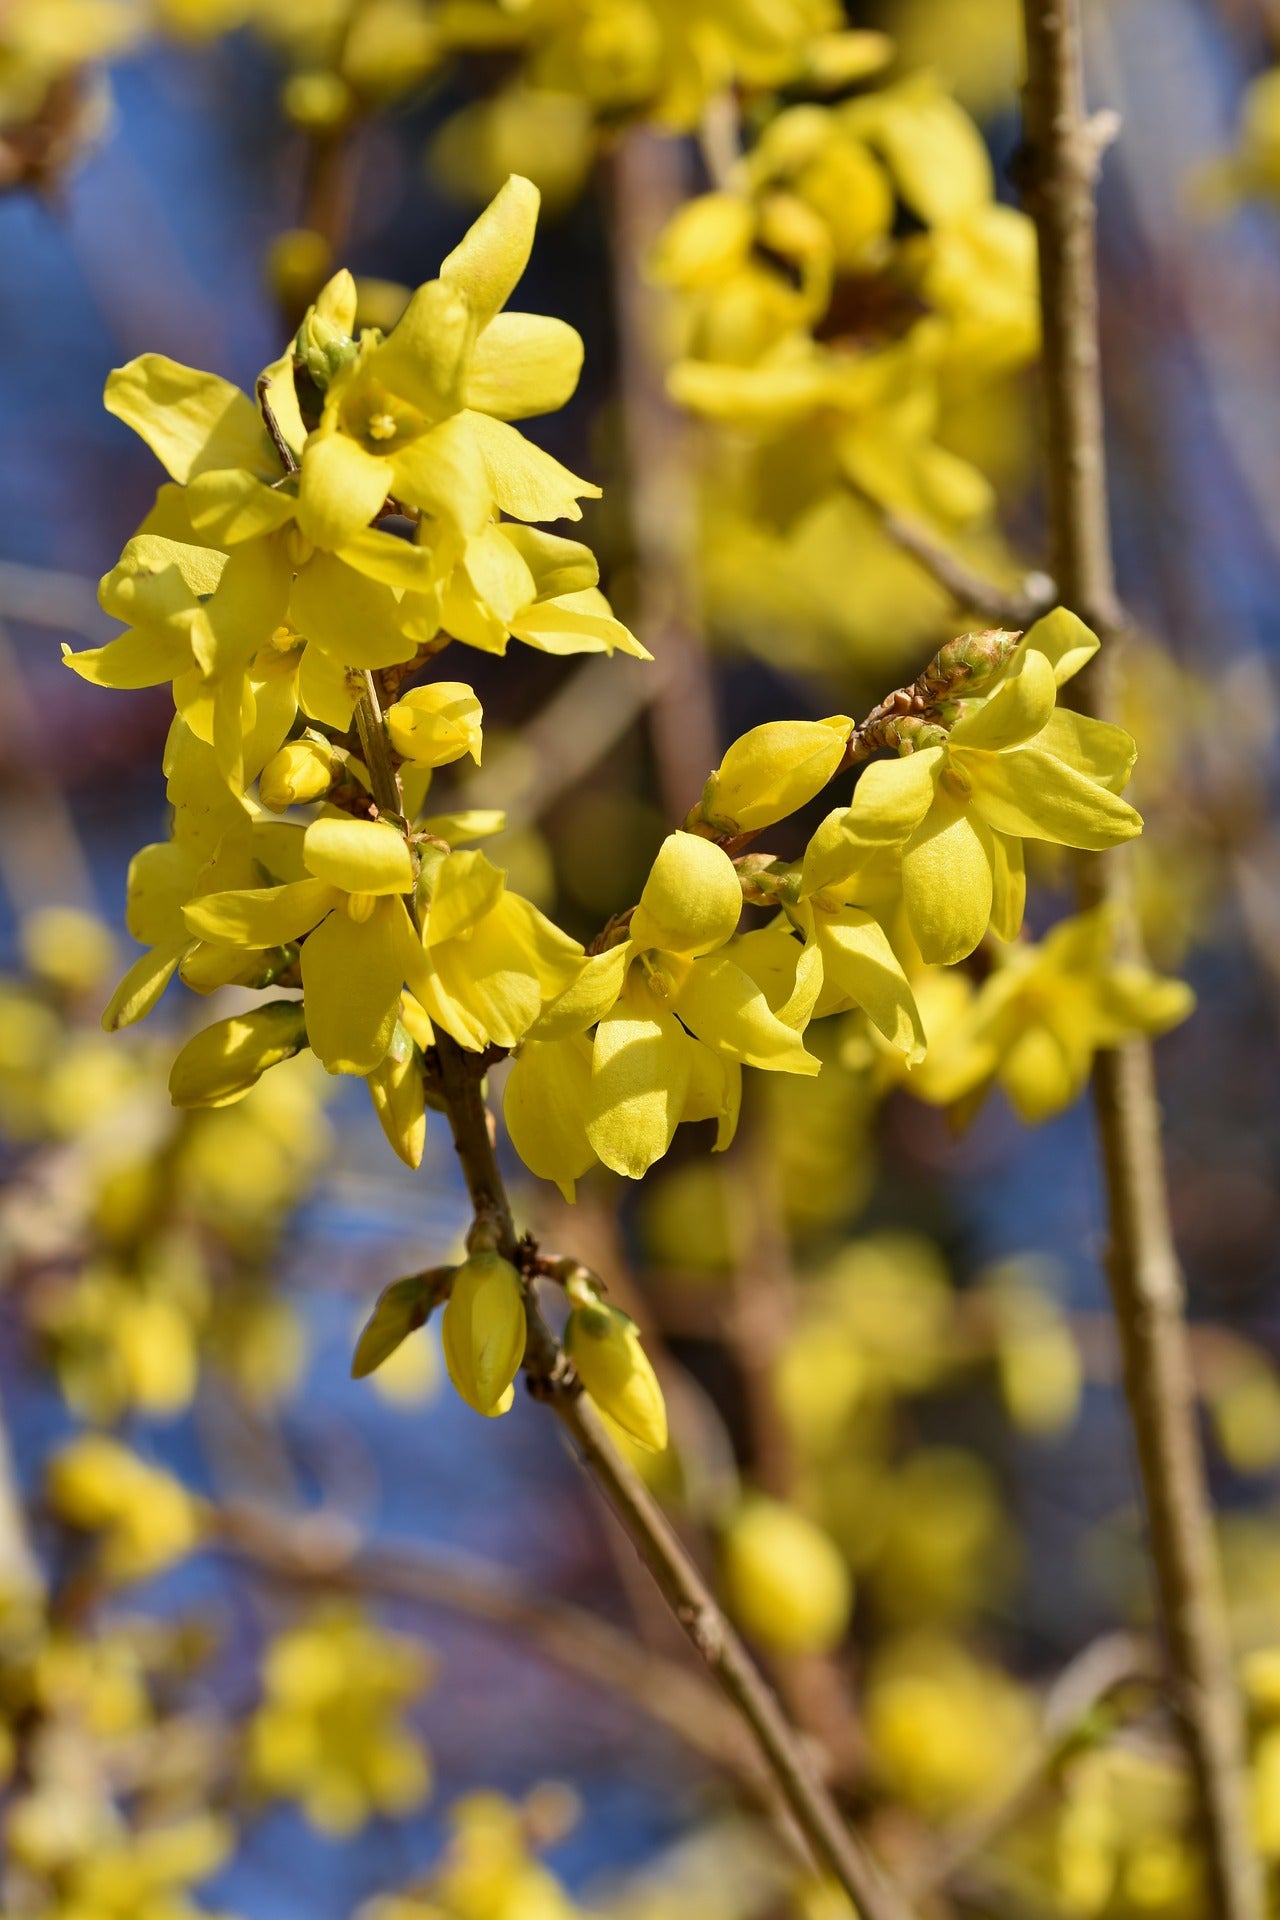 "Growing Forsythia Suspensa: Ultimate Guide to Blooming, Soil, Propagation, and Care"